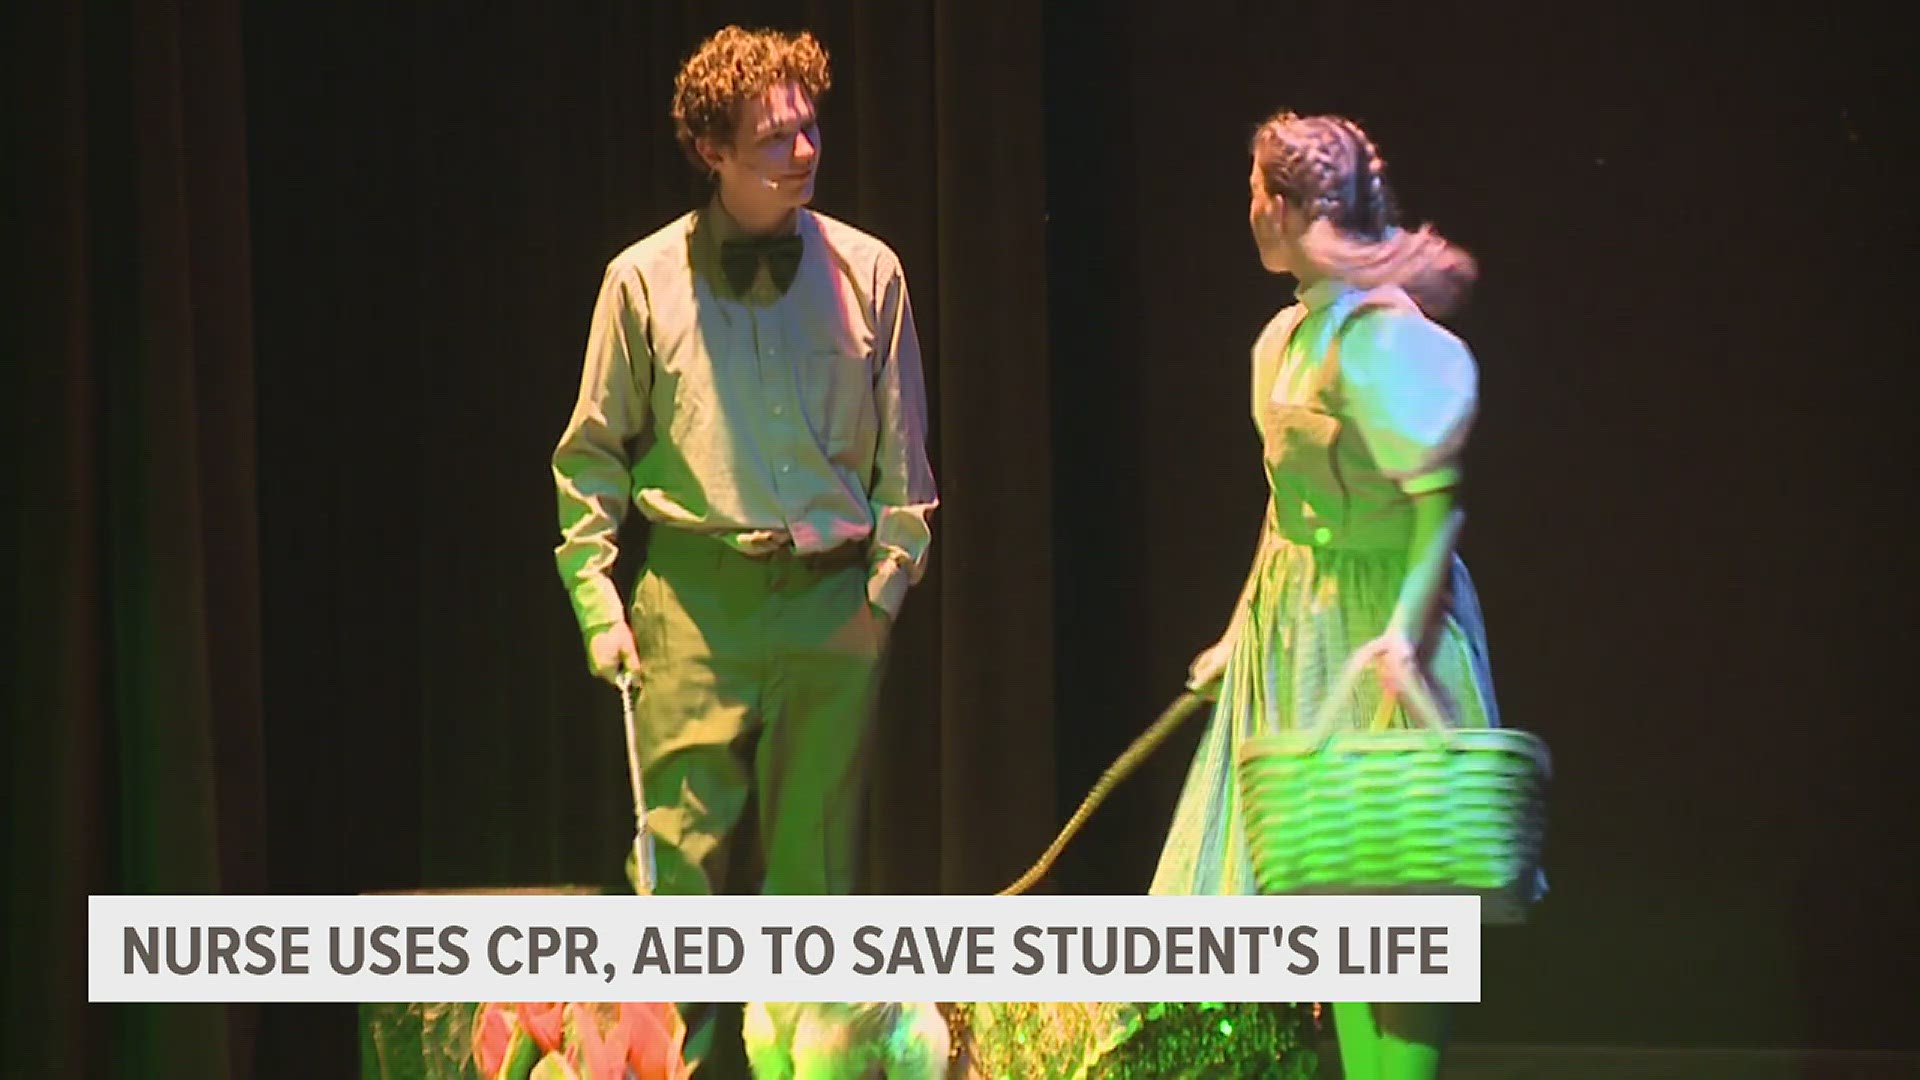 After collapsing and having a sudden cardiac arrest during class, just 12 days later, 16-year-old Maddox was on stage starring in The Wizard of Oz.